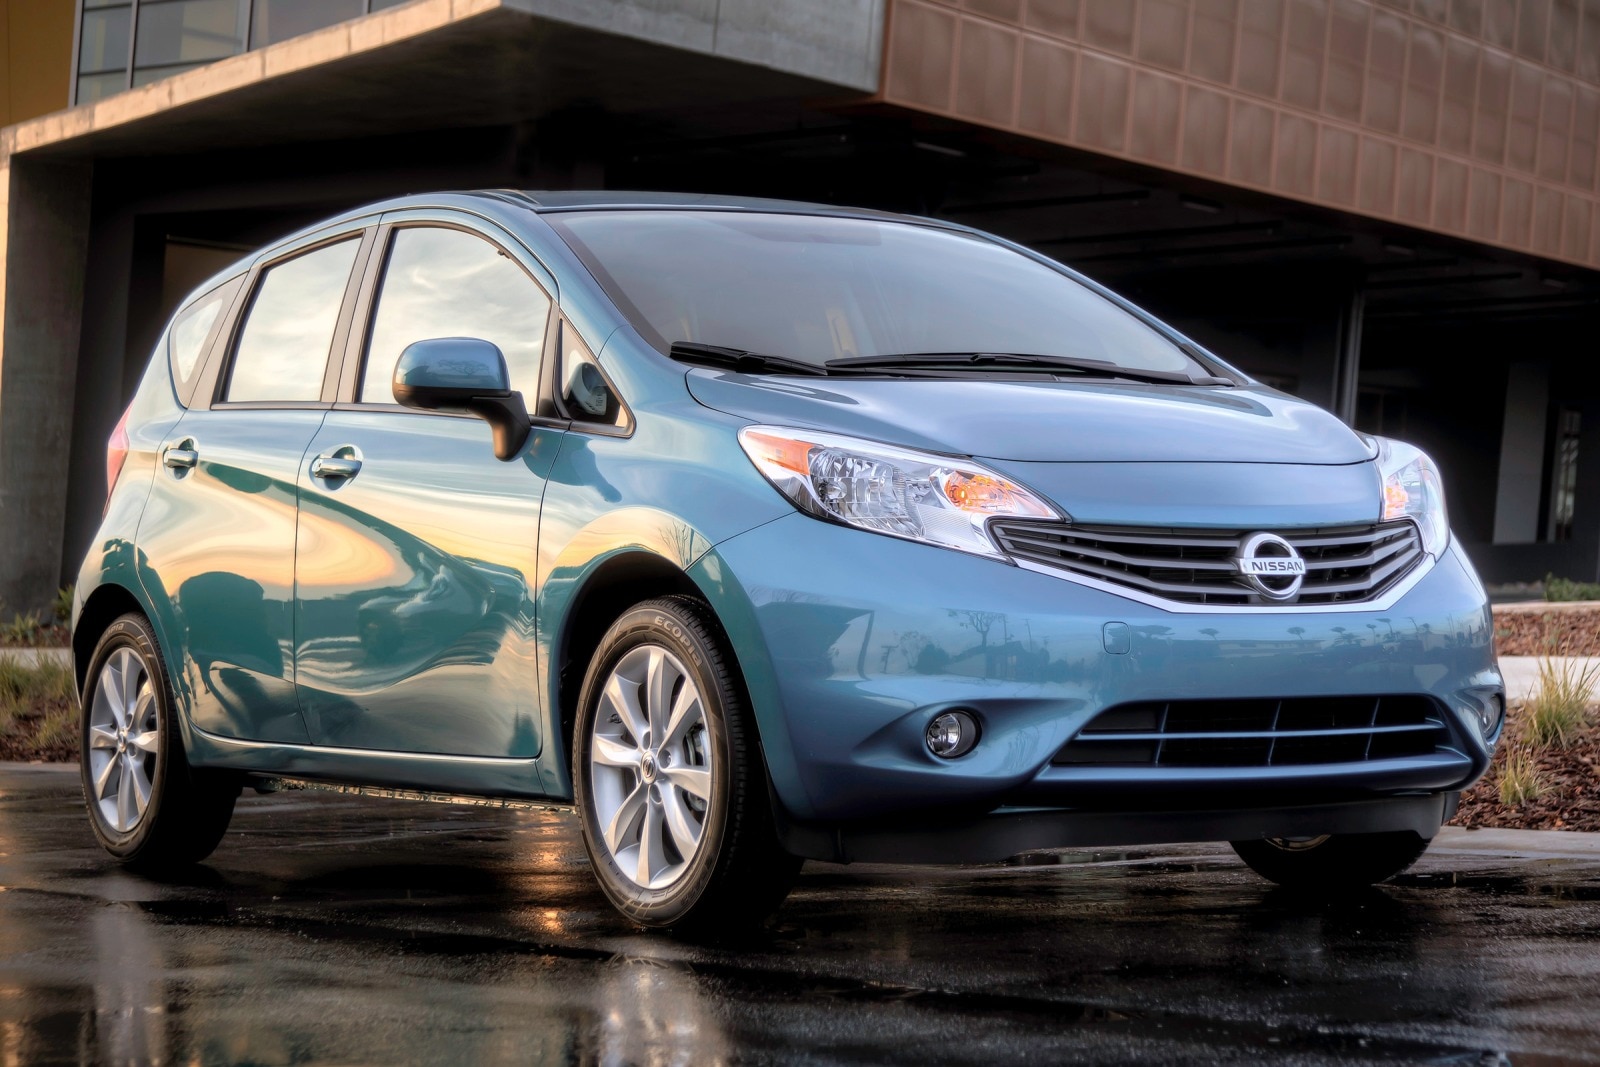 2015 Nissan Versa Note Review & Ratings | Edmunds